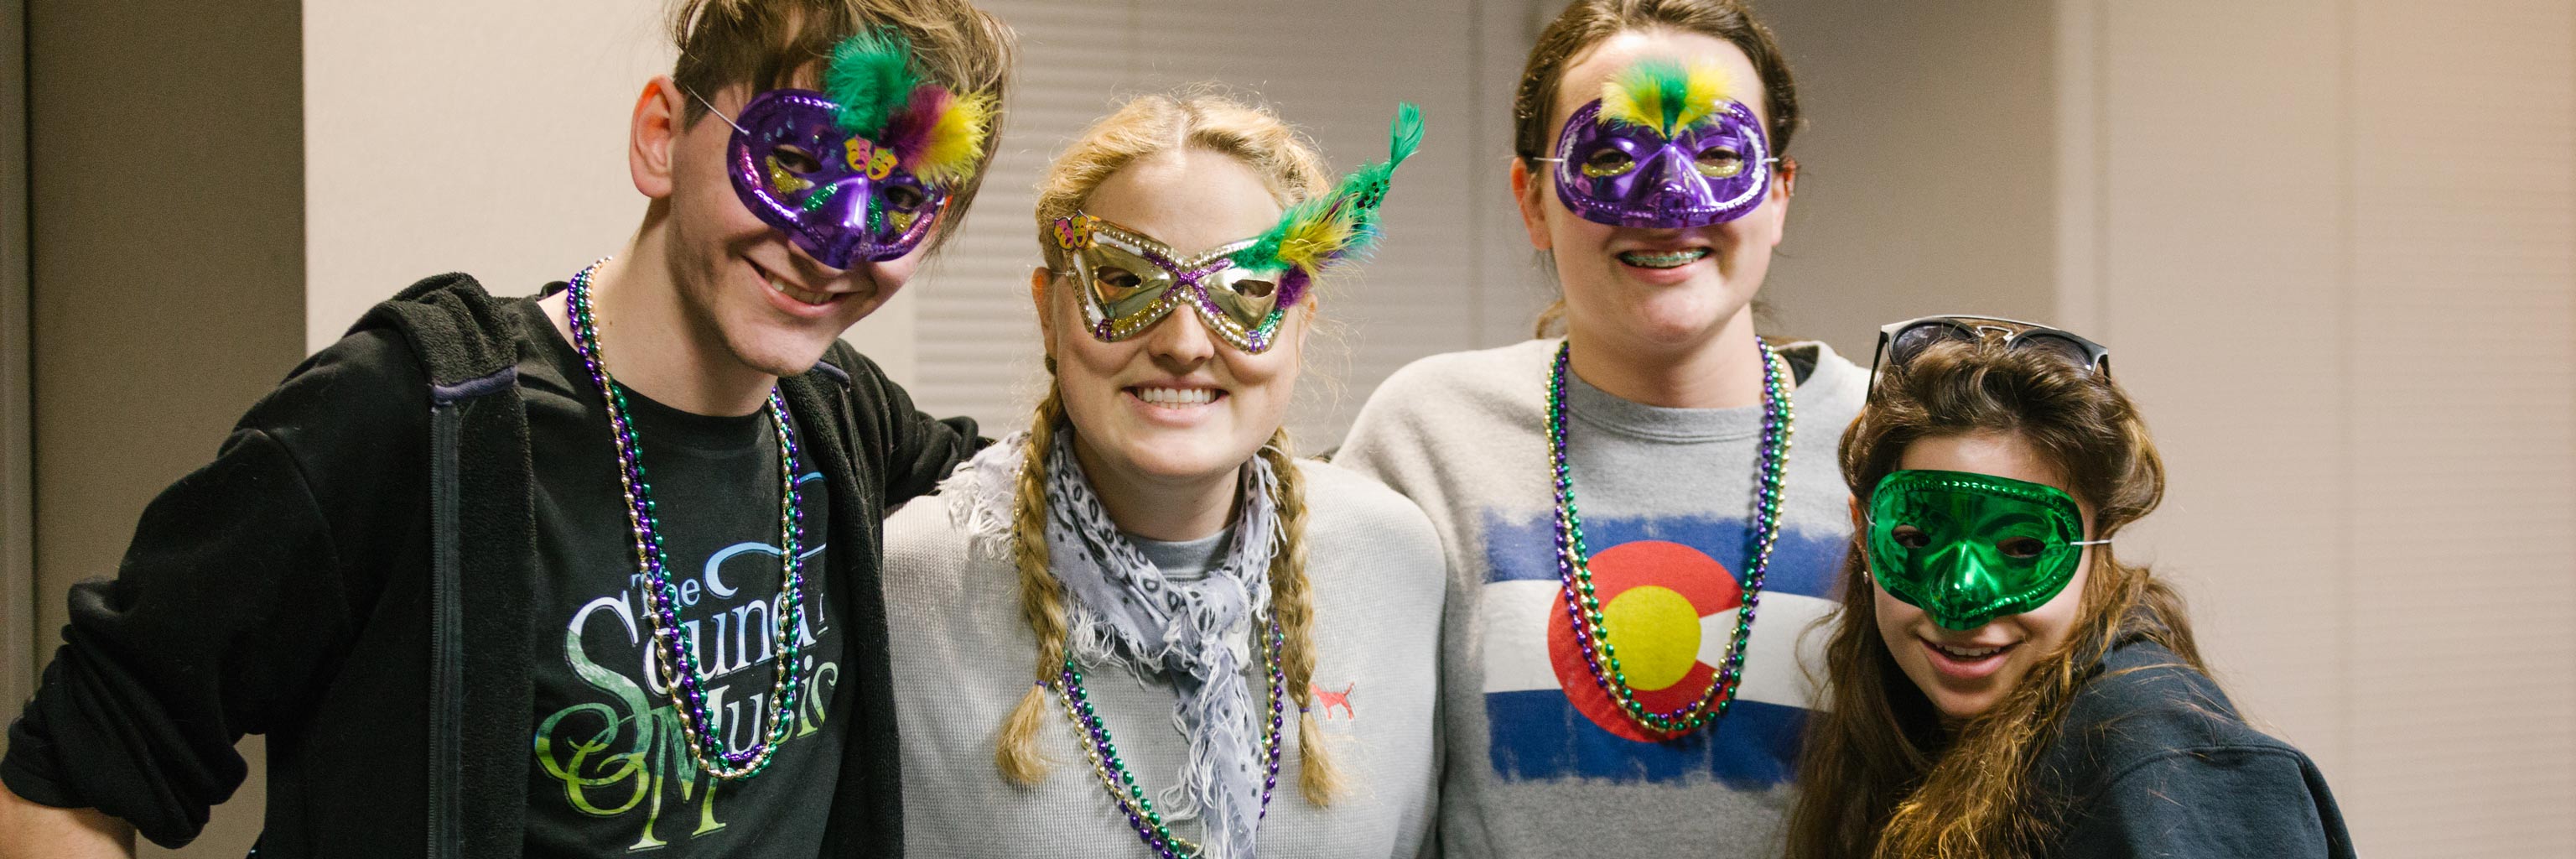 The French Club celebrates Mardi Gras with beads and masks.